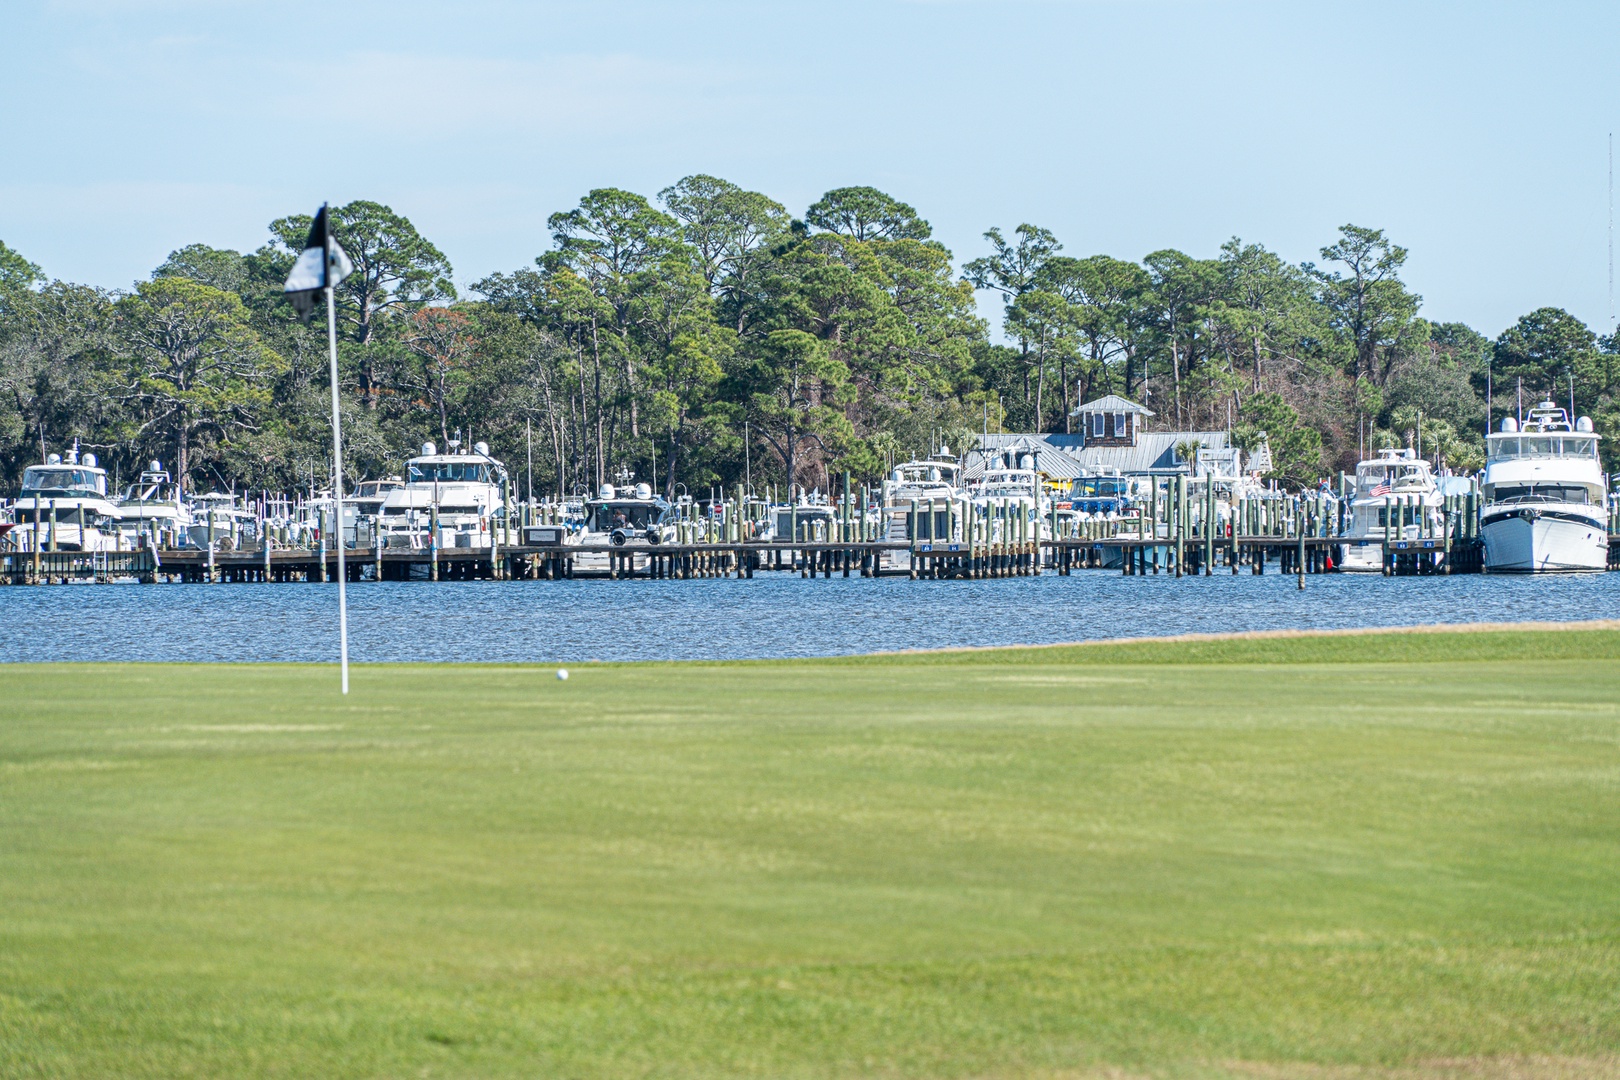 Spend your days golfing by the marina – stunning views await!